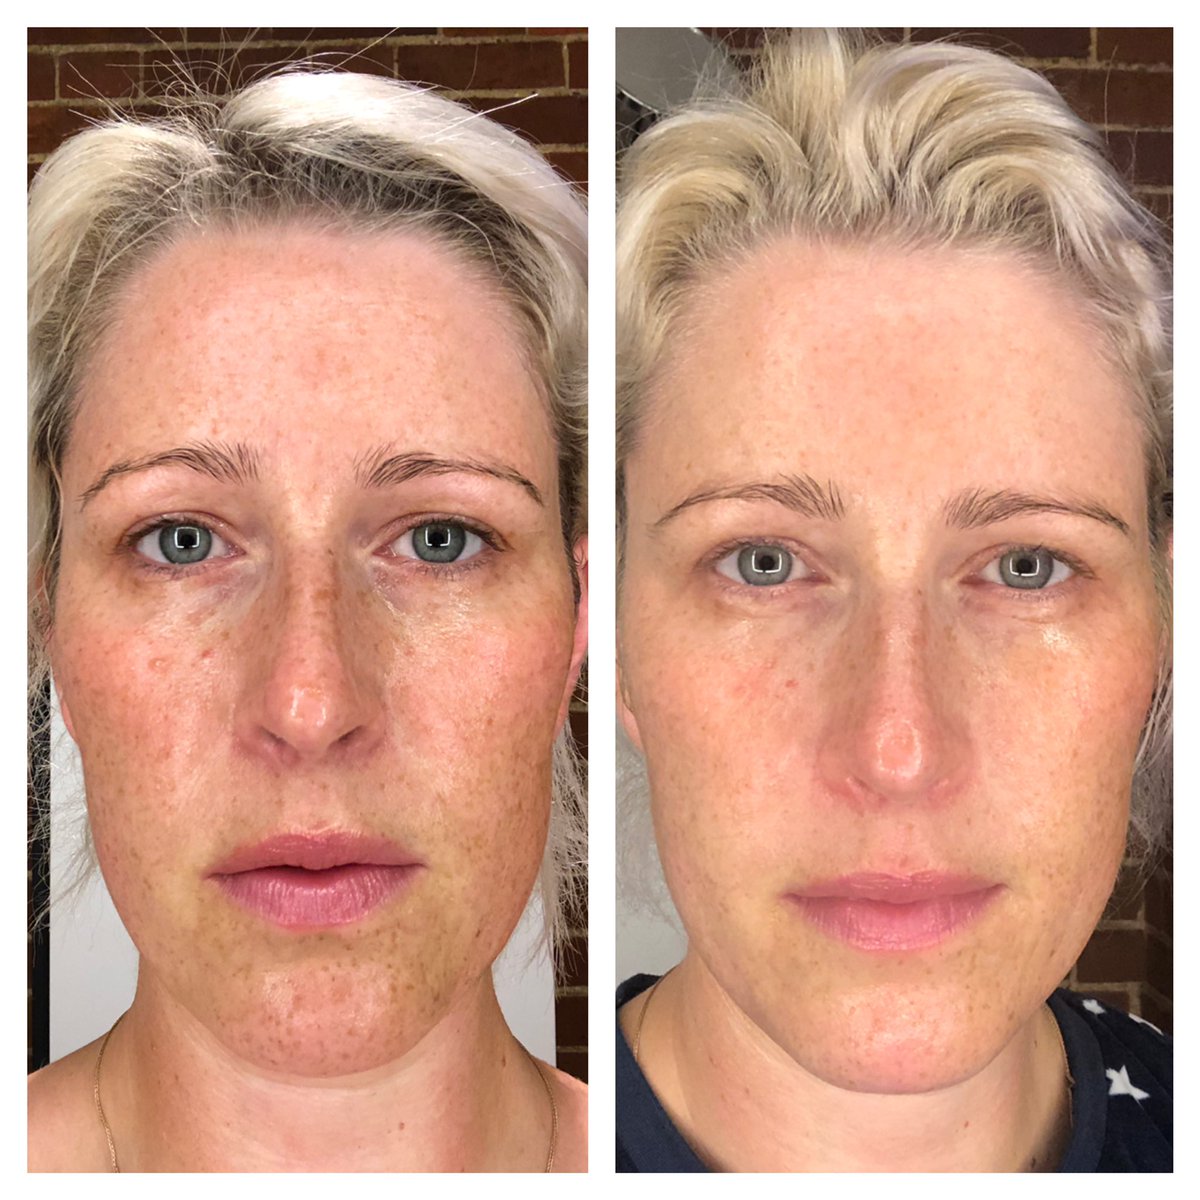 @TropicSkincare Amazing results after 1 month of using smoothing cleanser, toner, skin feast in am and skin dream pm, and super greens. Face mask twice a week too. Brighter, less congested, and love having a morning and evening ritual to focus on self care #selfcare #betterskin